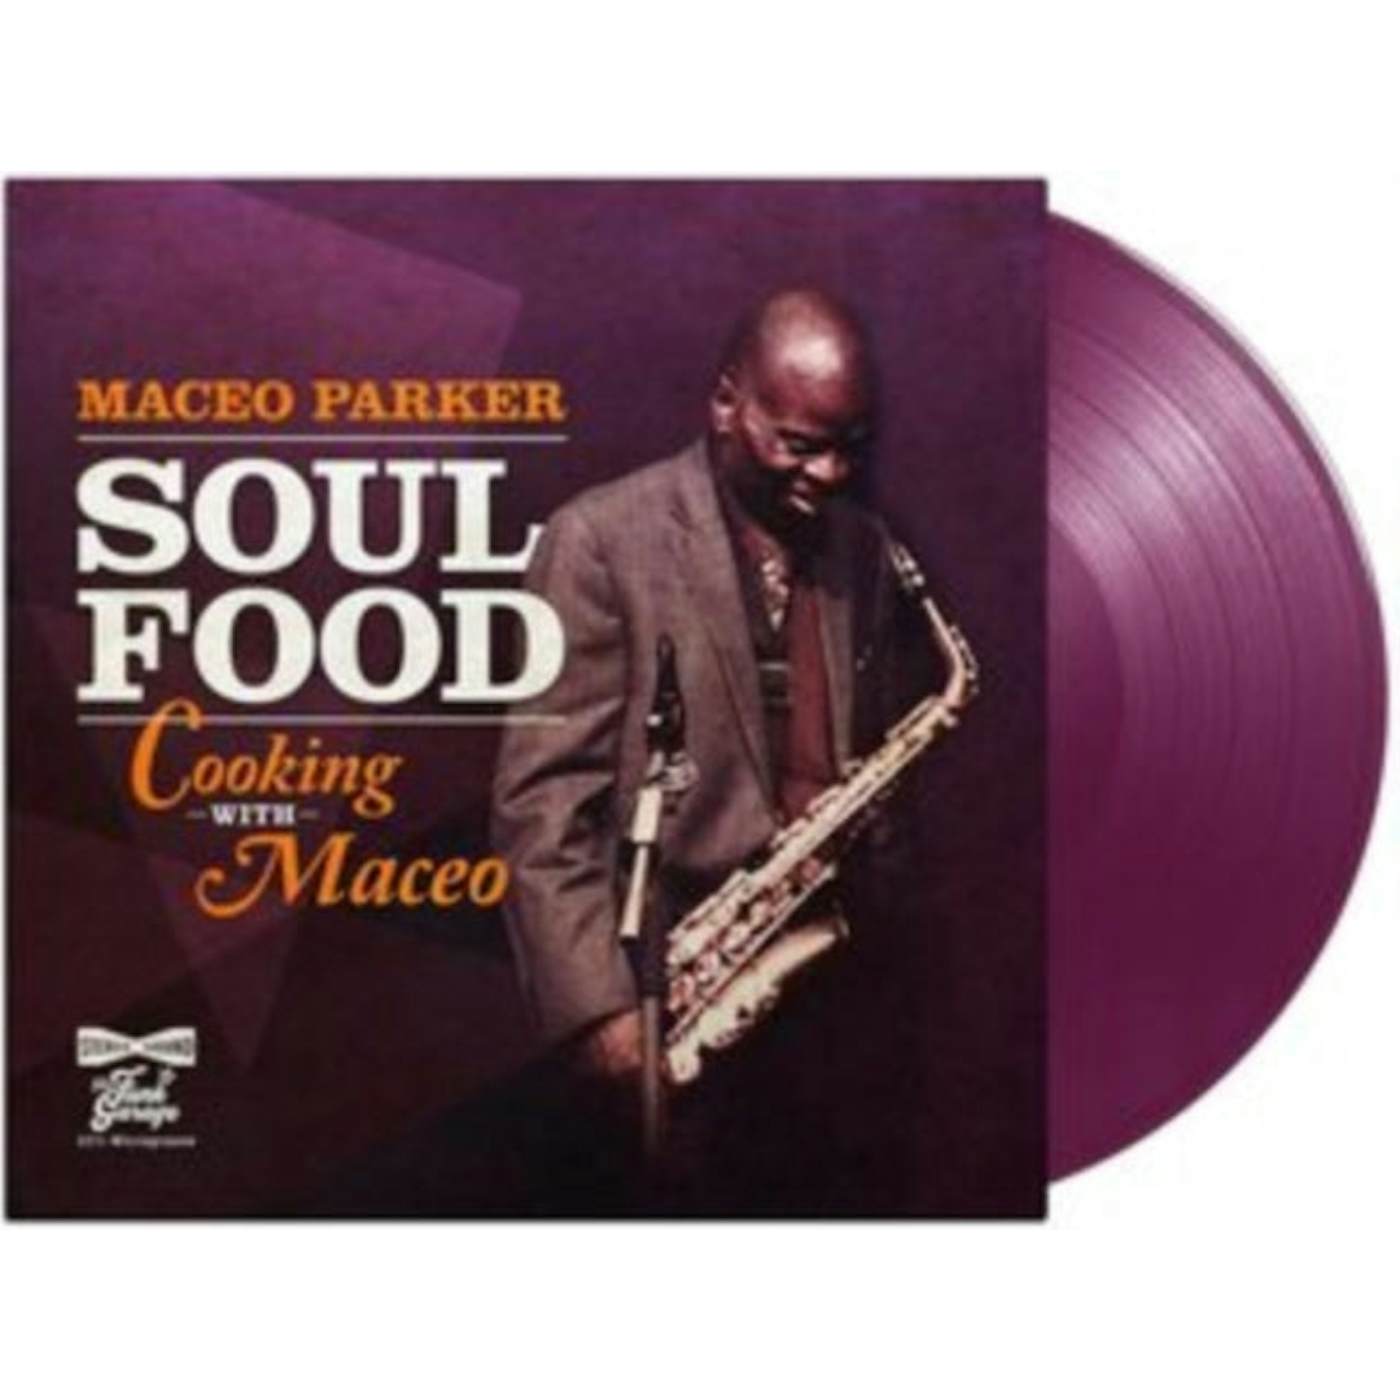 Maceo Parker LP - Soul Food - Cooking With Maceo (Vinyl)